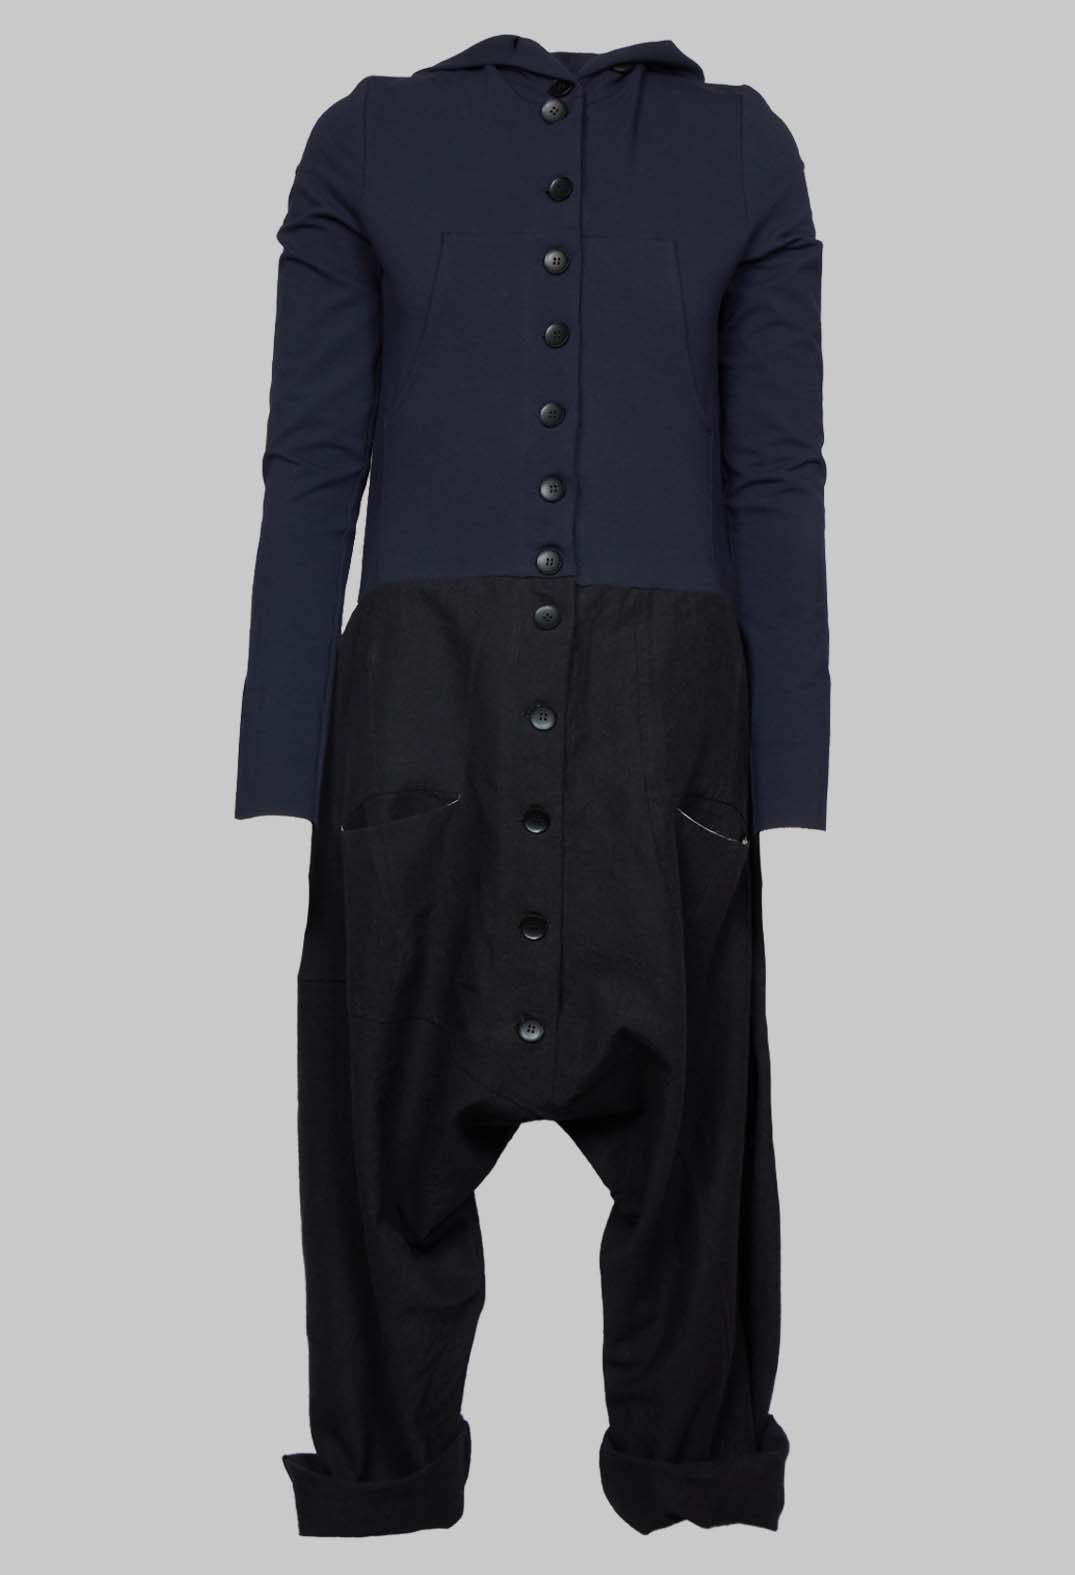 Dropcrotch Jumpsuit with Contrasting Fabric in Navy and Black